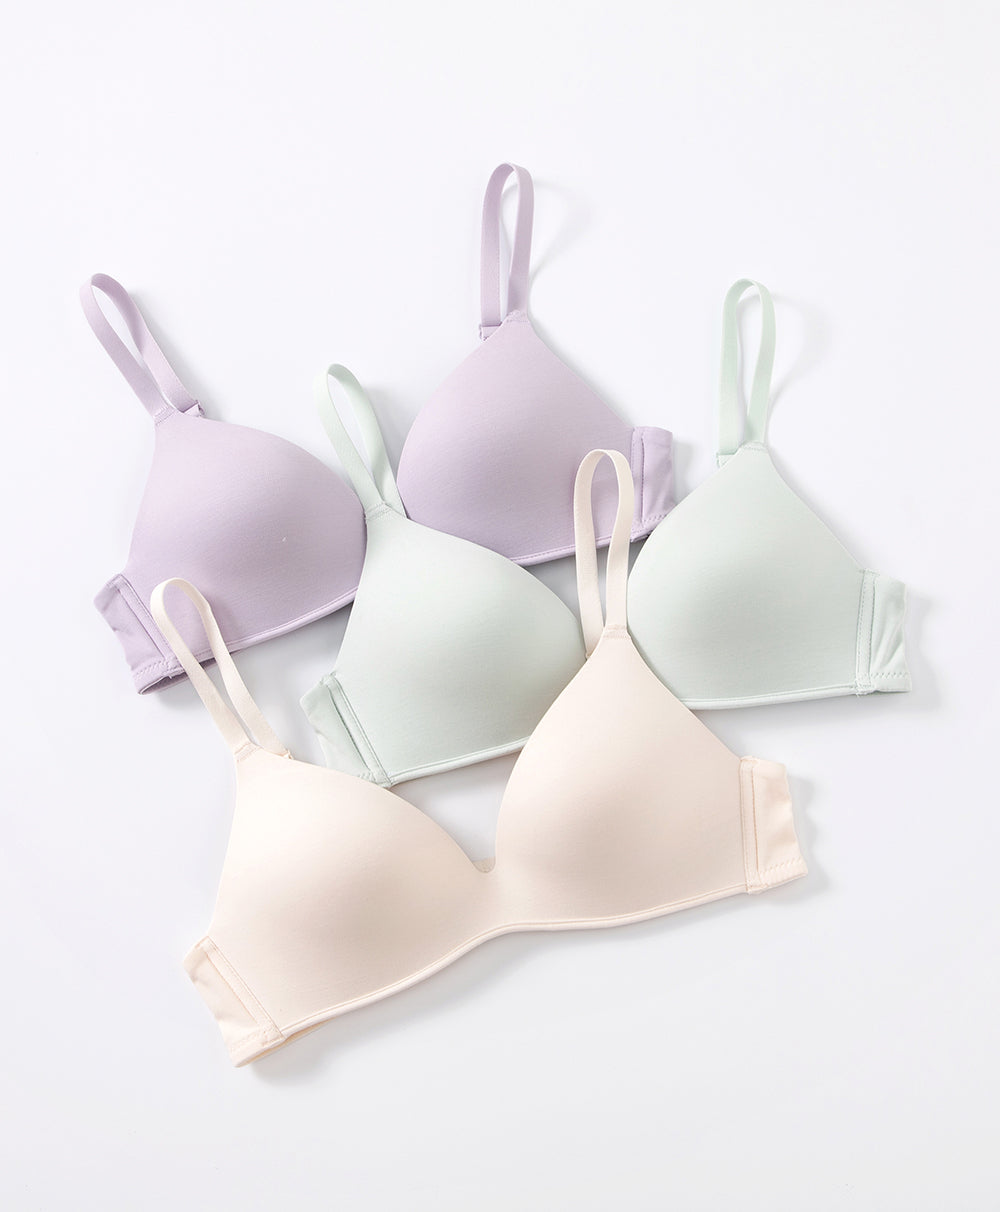 Young Hearts - Try our comfy Push Up Wireless Bra today😍 Stay home, stay  comfortable. . Shop now:  #stayhomesafe  #SgUnited #Stayhopeful #supportlocalsg #circuitbreaker  #youngheartssingapore